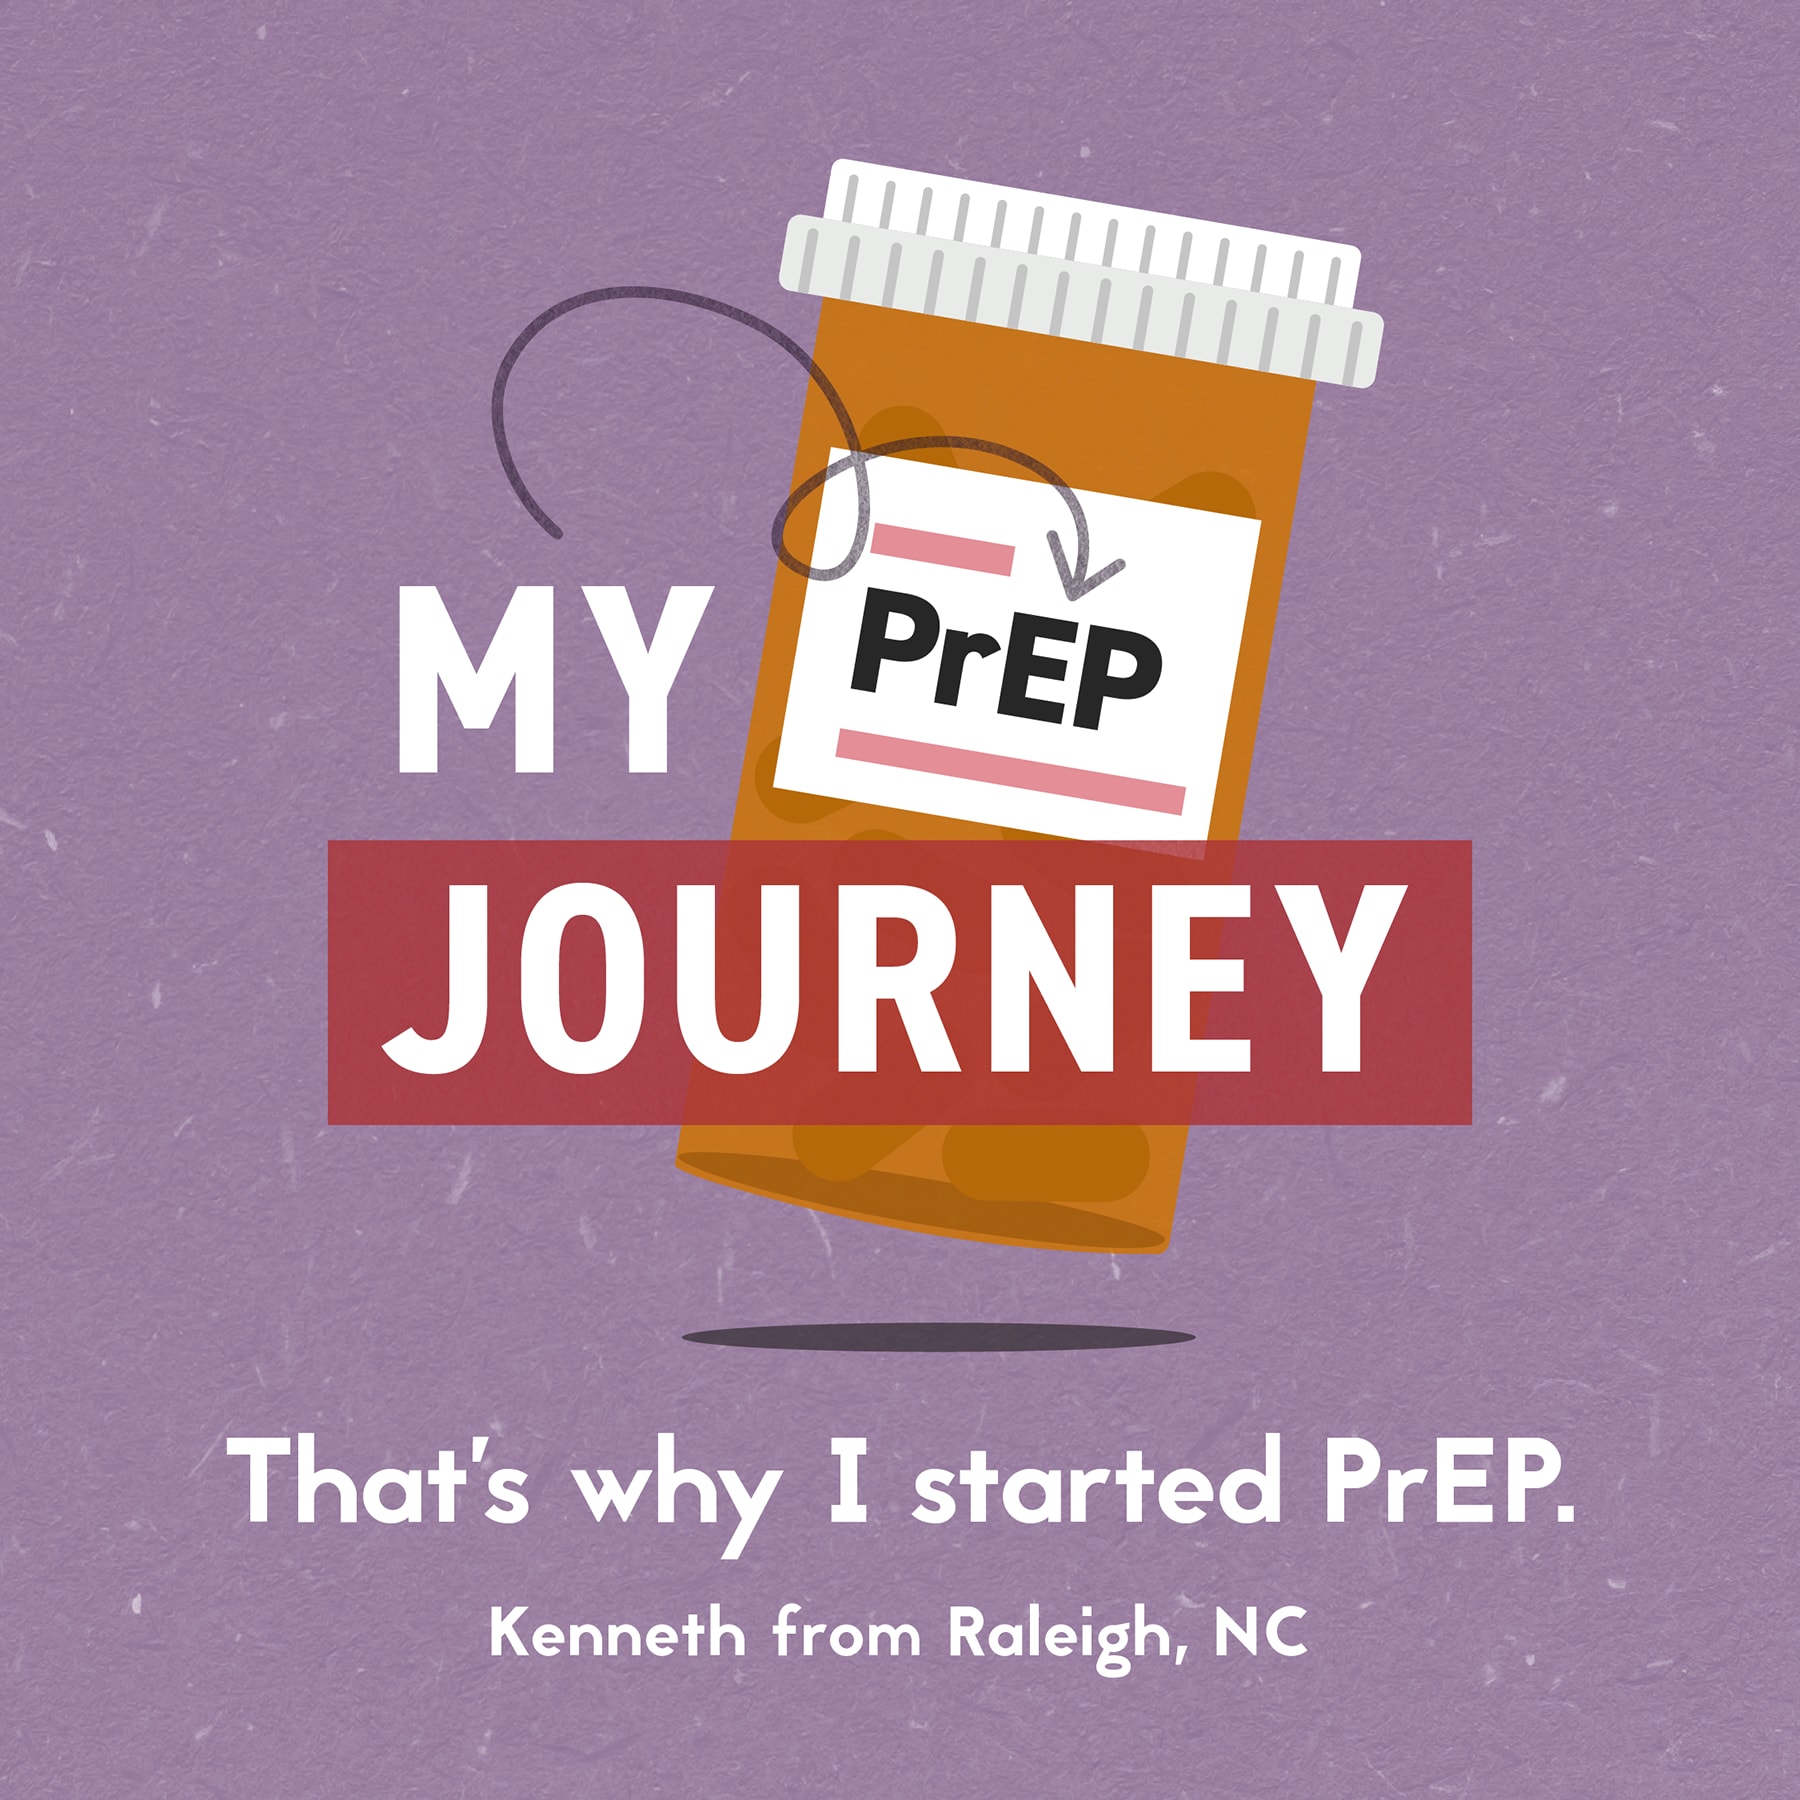 My PrEP journey. That's why I started PrEP.